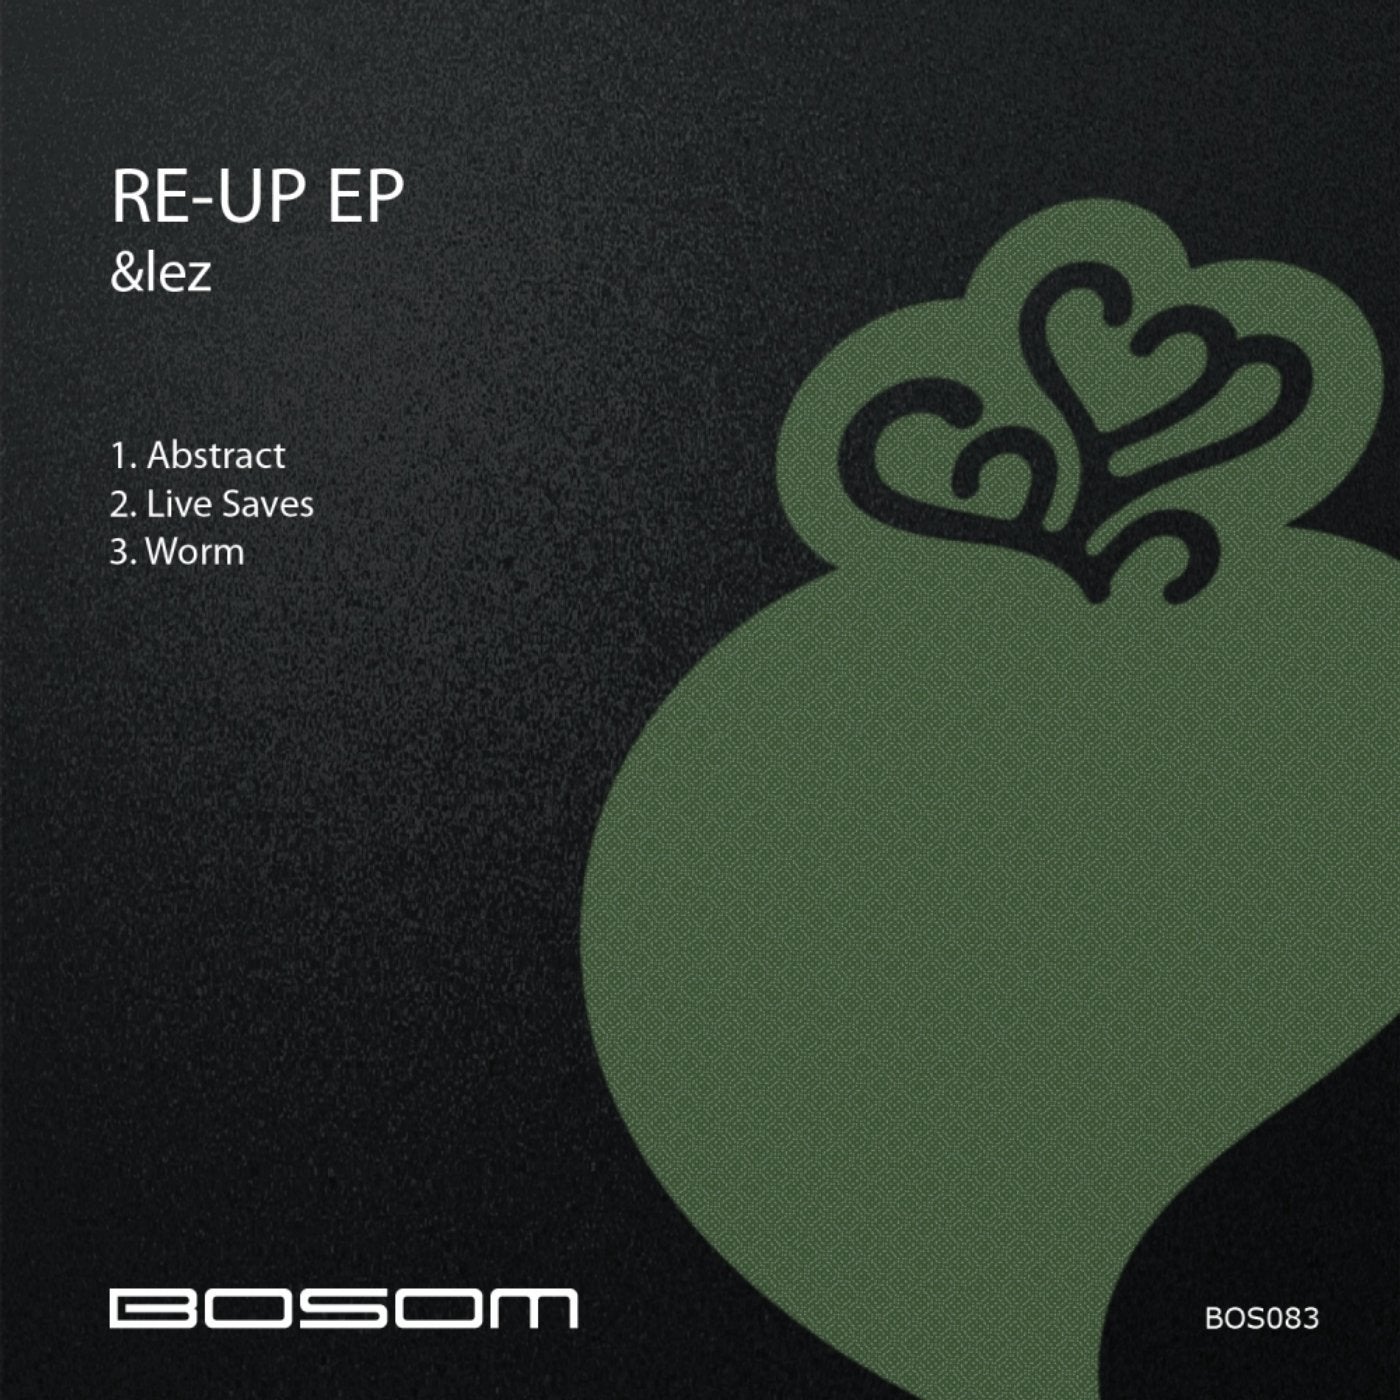 Re-Up EP